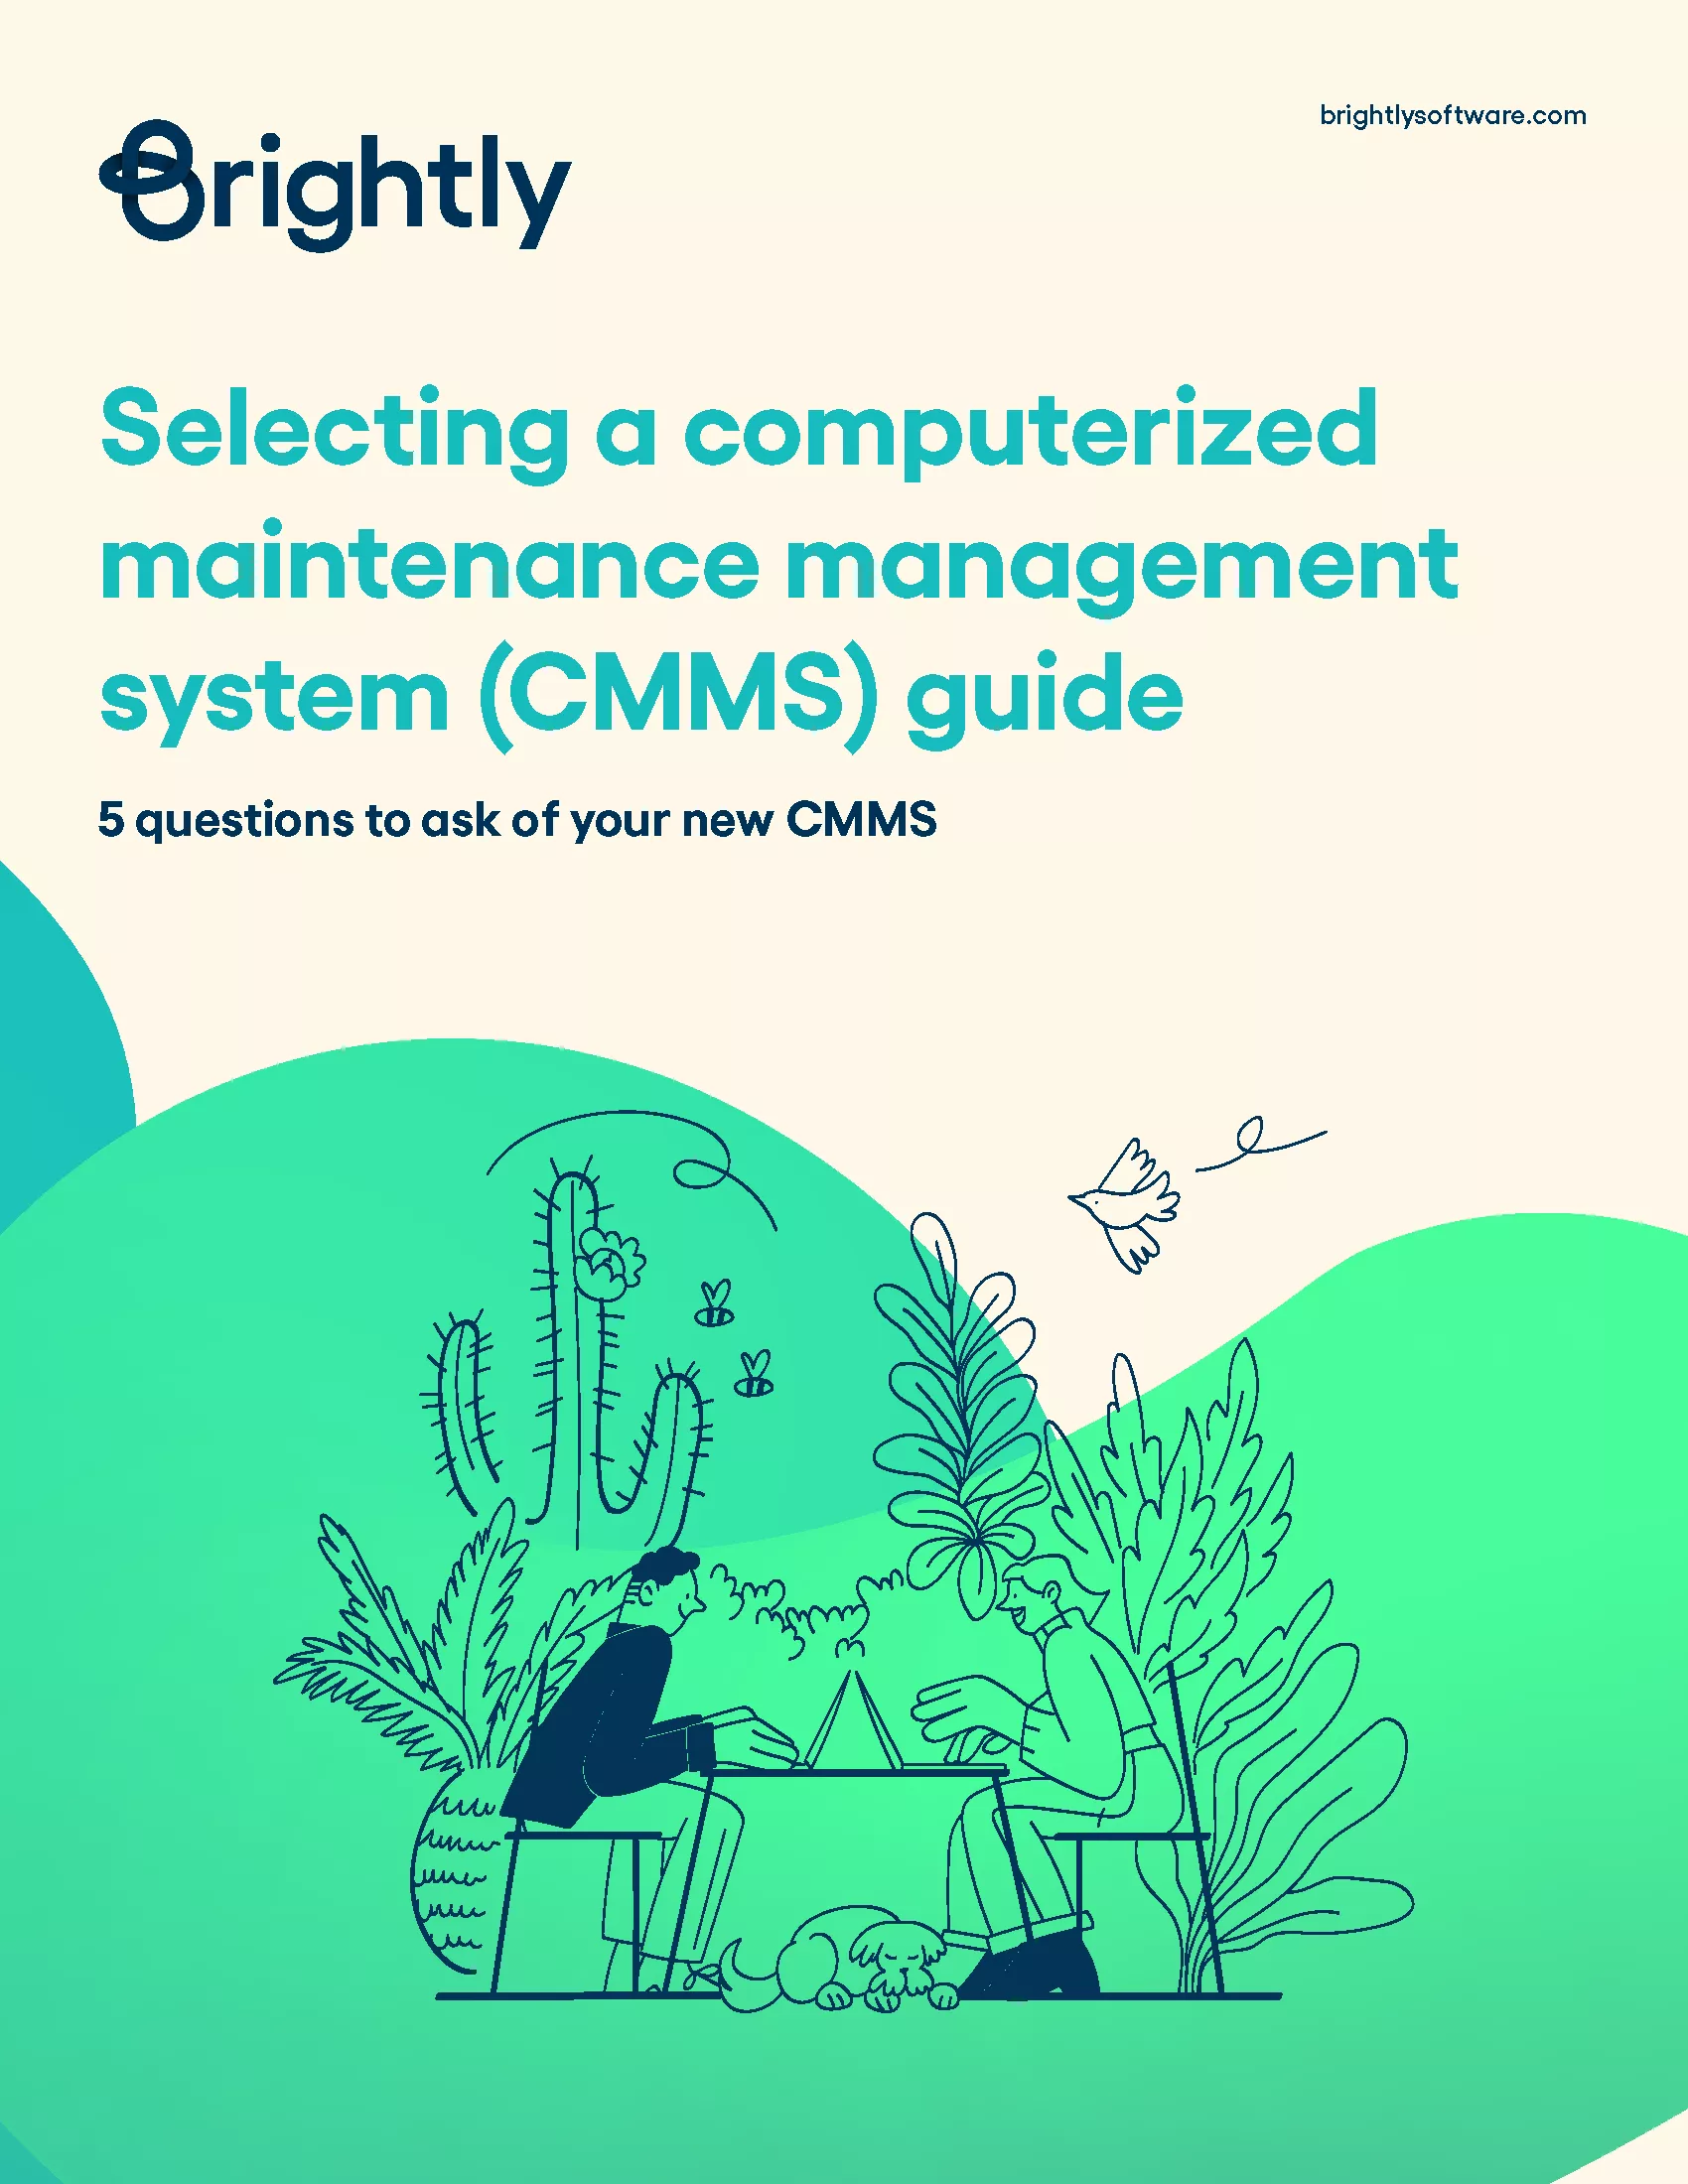 Selecting a computerized maintenance management system (CMMS) guide